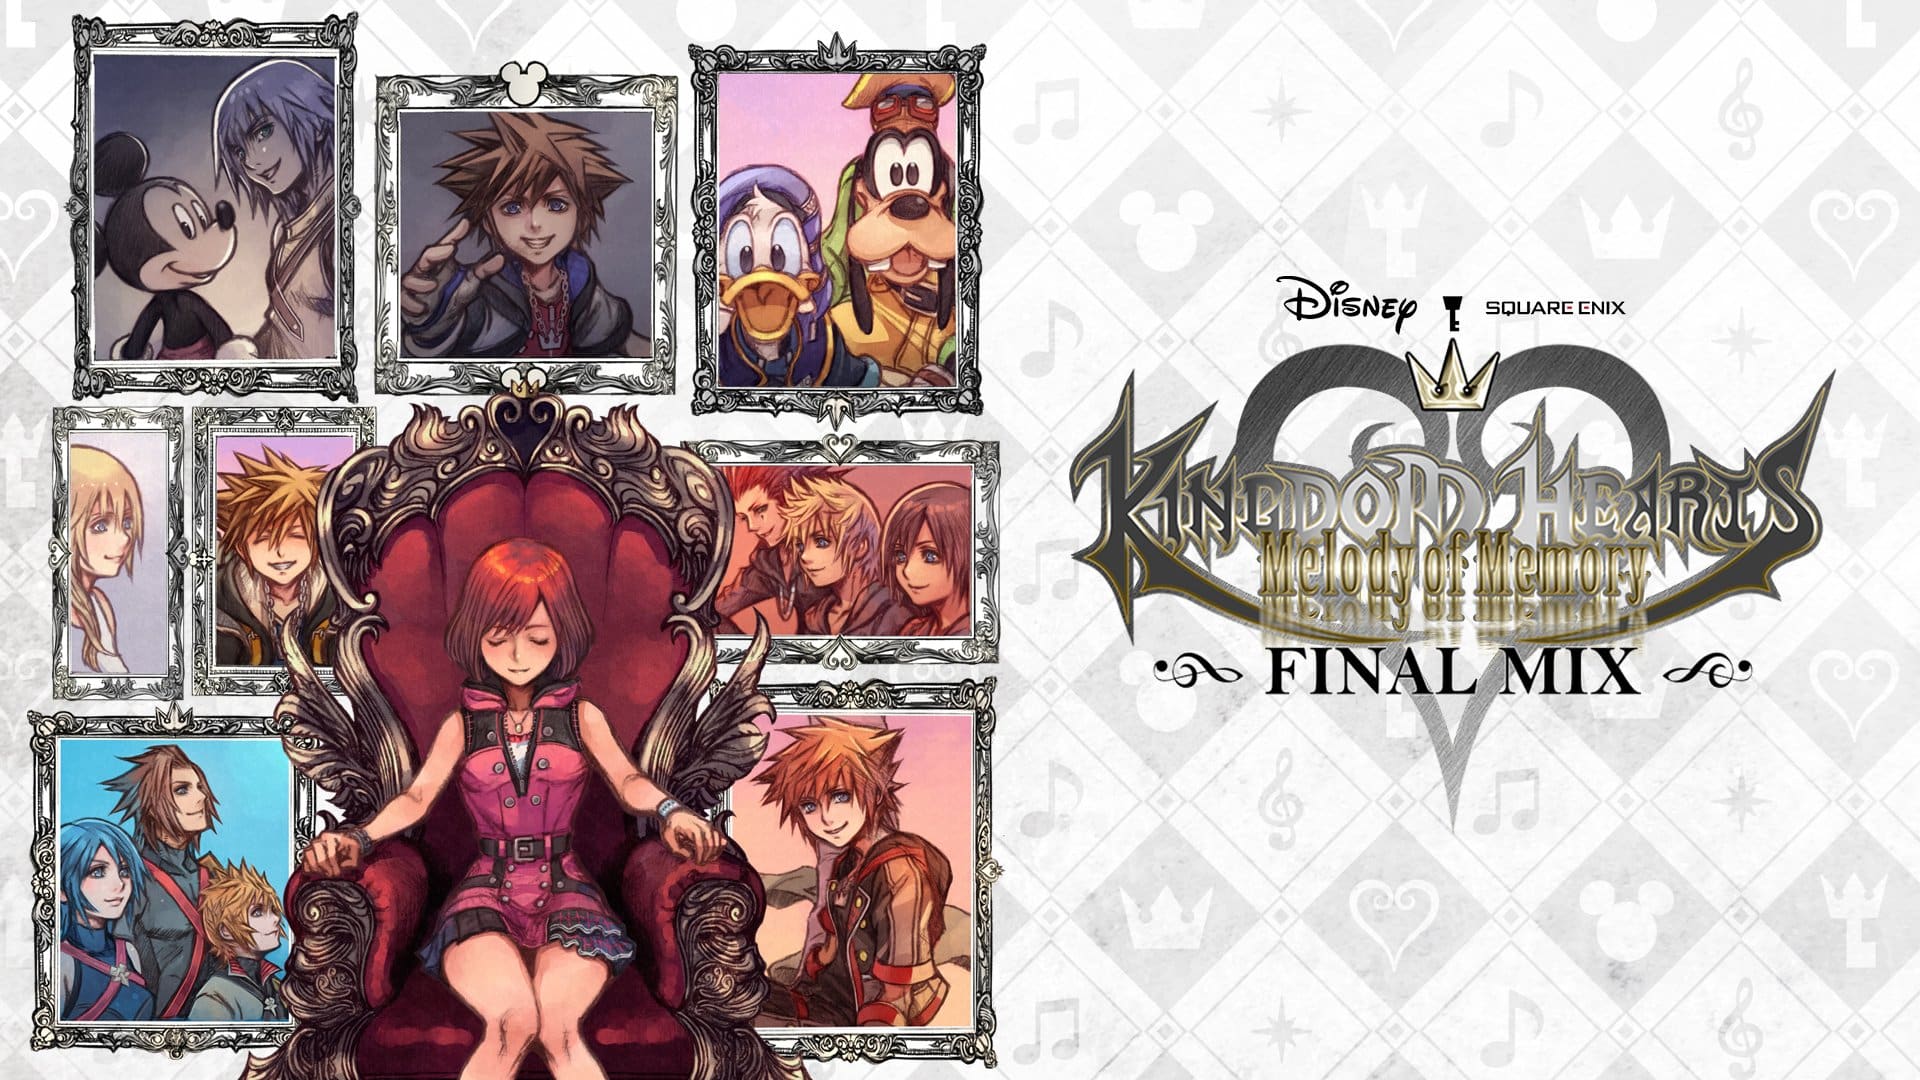 Fan Modders Announce Kingdom Hearts Melody of Memory: Final Mix; Friend Matchmaking & More